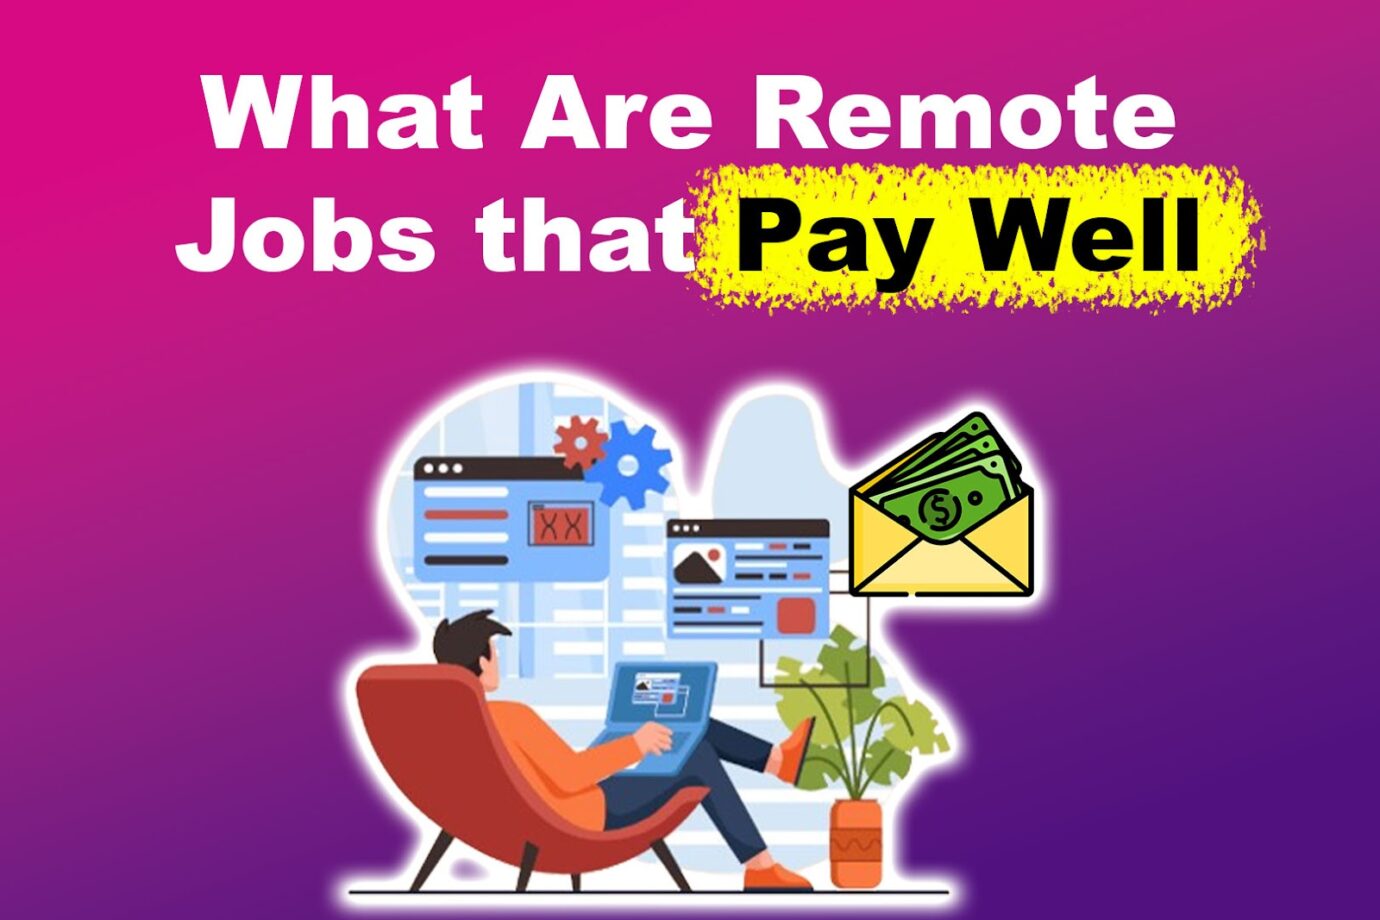 What Are Remote Jobs that Pay Well